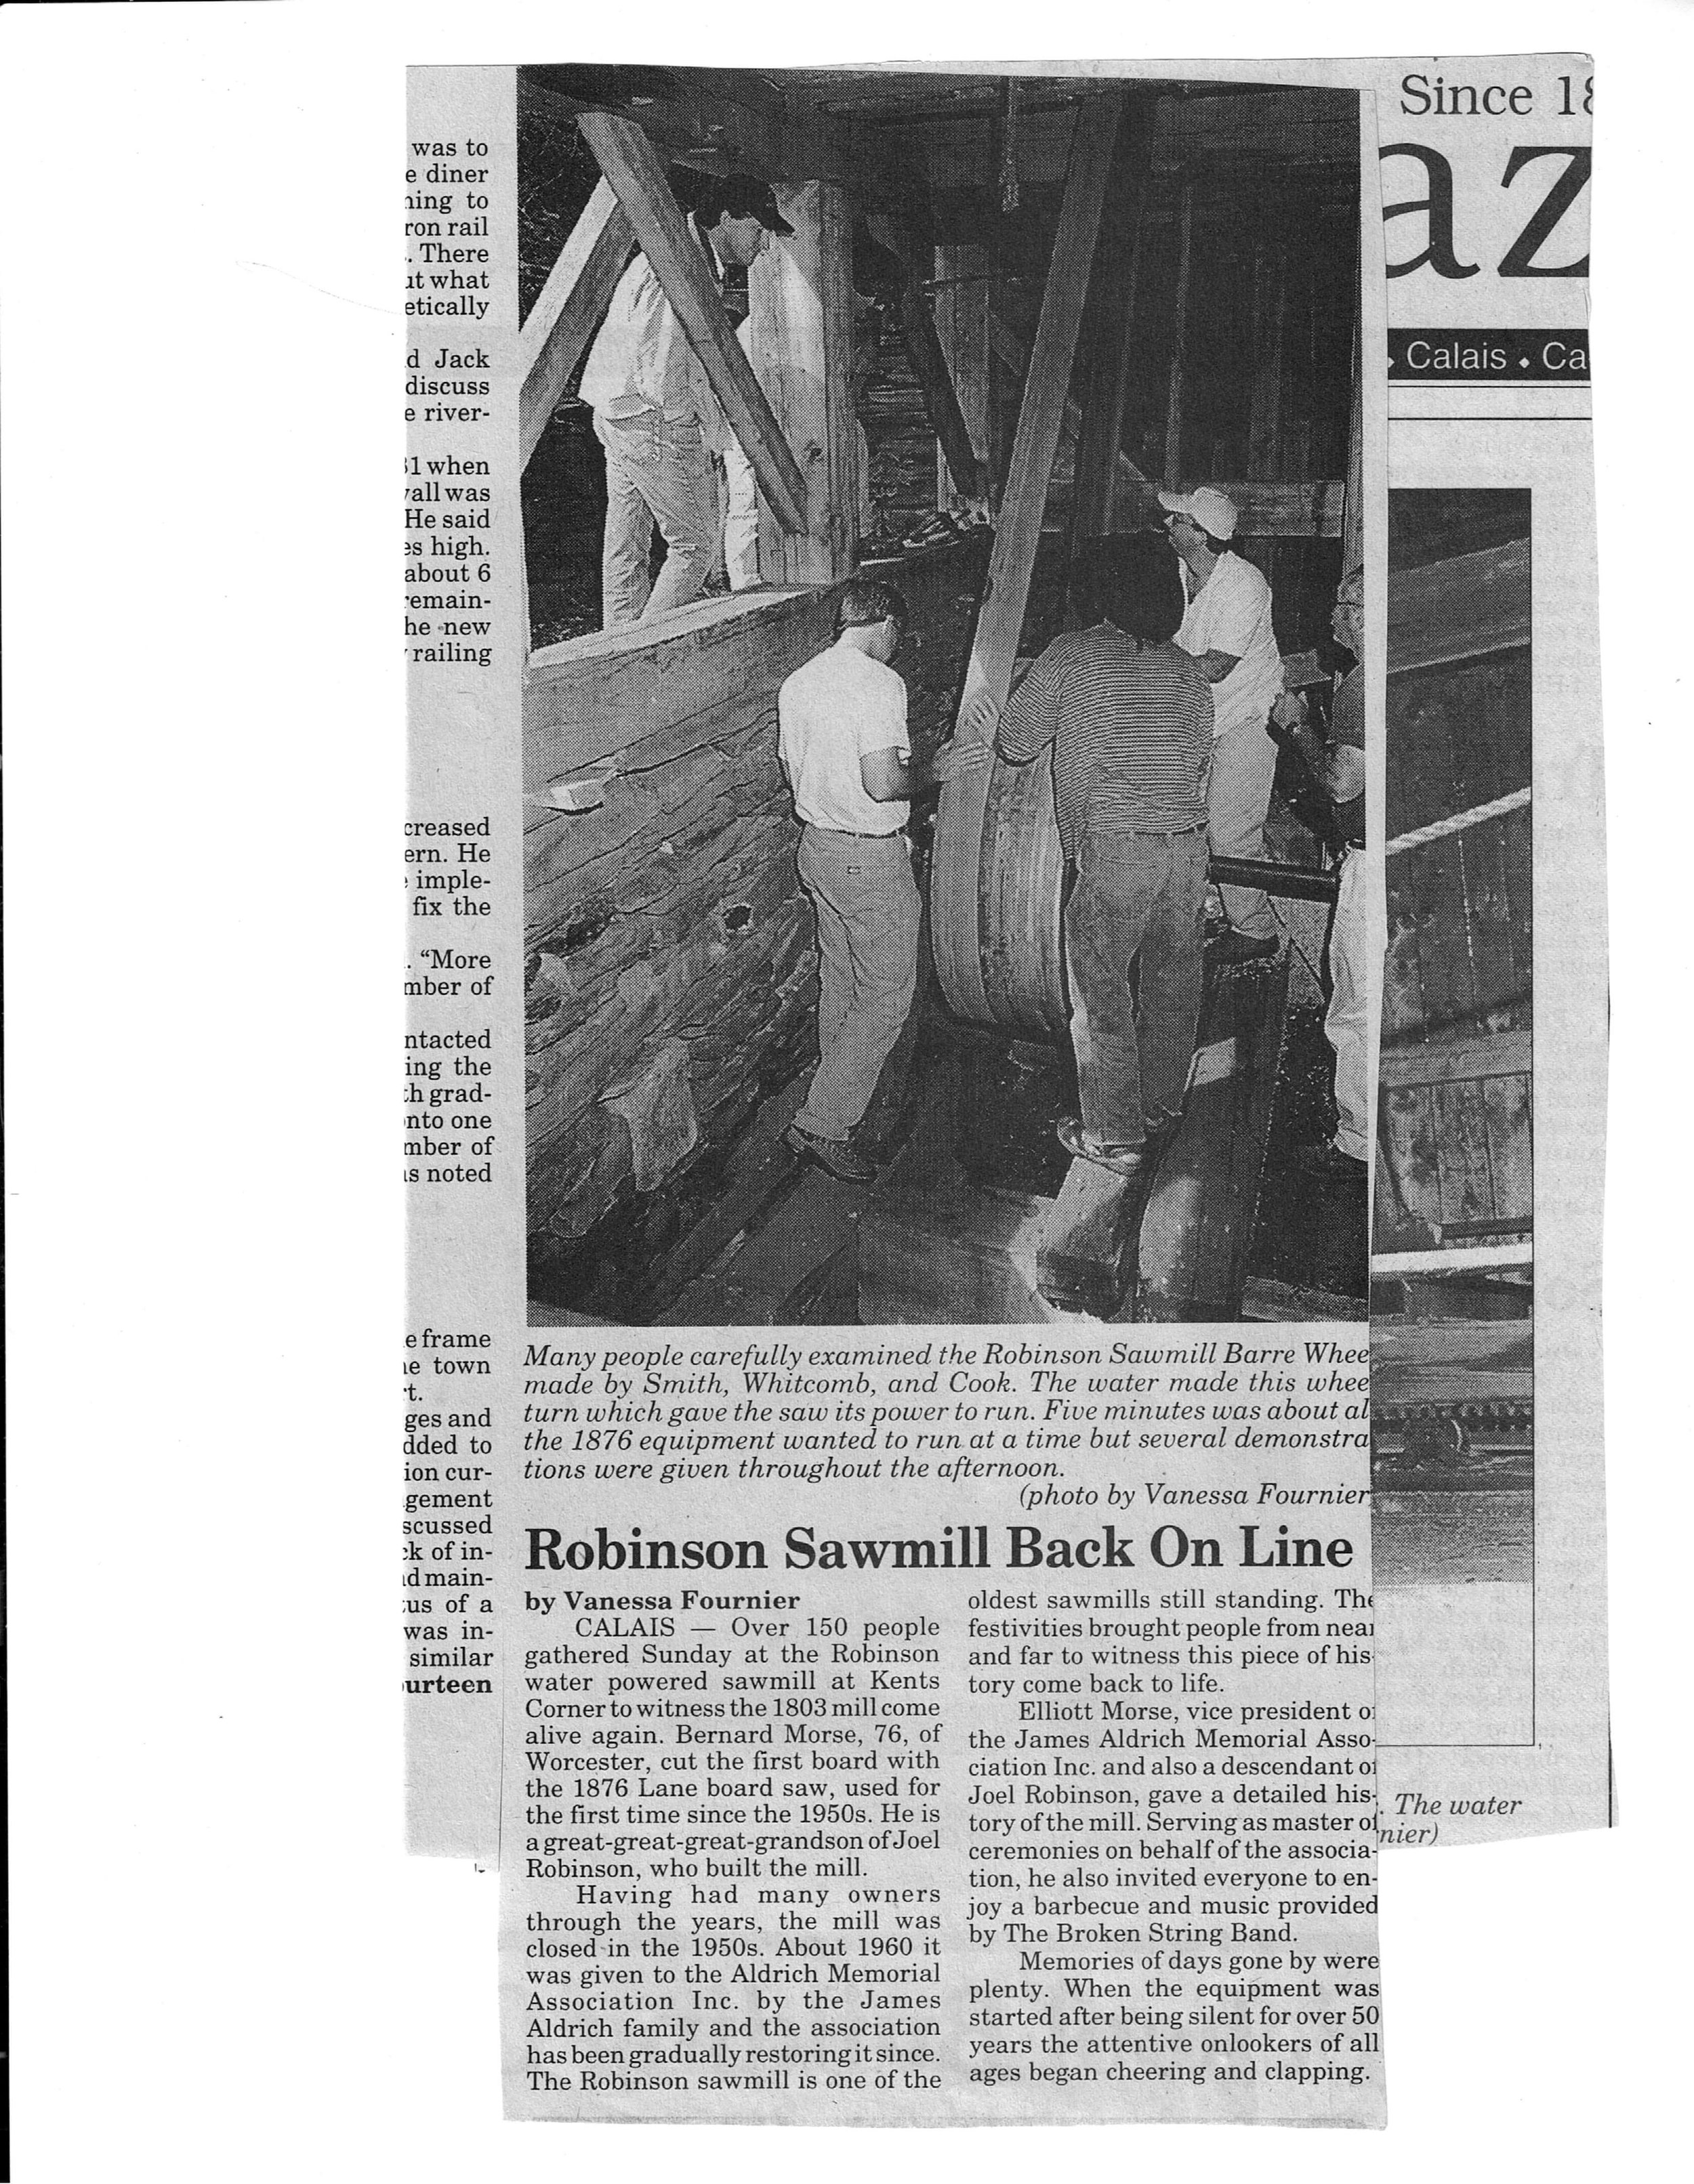 Newspaper article clipping: 'Robinson Sawmill Back On Line'